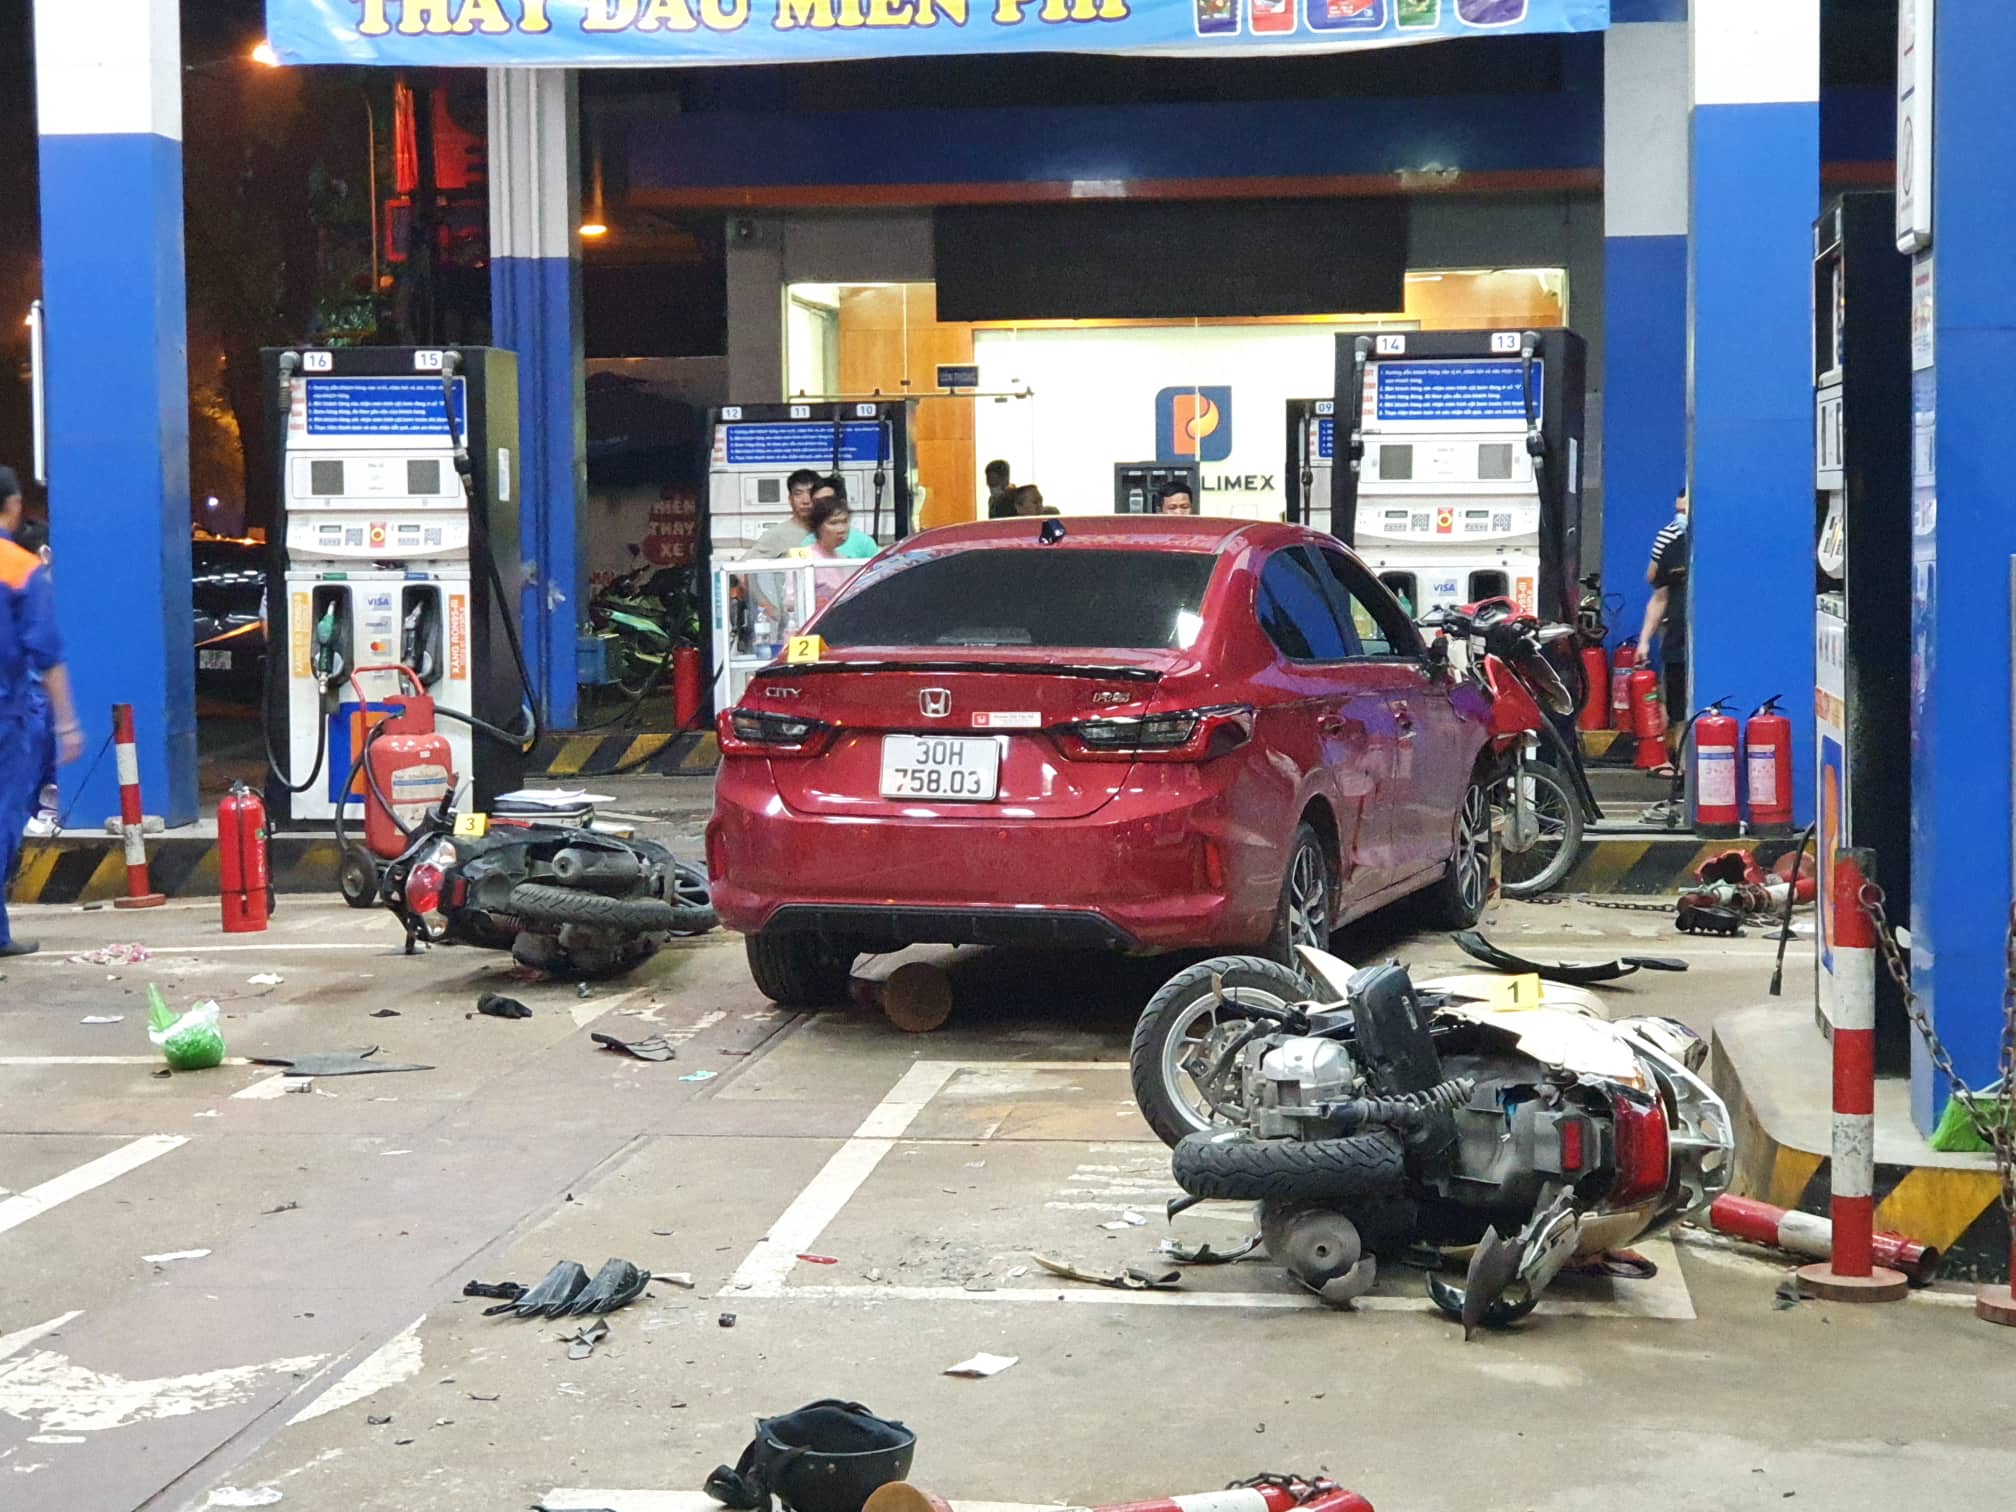 A car crashed into a gas station on Lang Street in Dong Da District, Hanoi, August 12, 2022. Photo: Ha Quan / Tuoi Tre